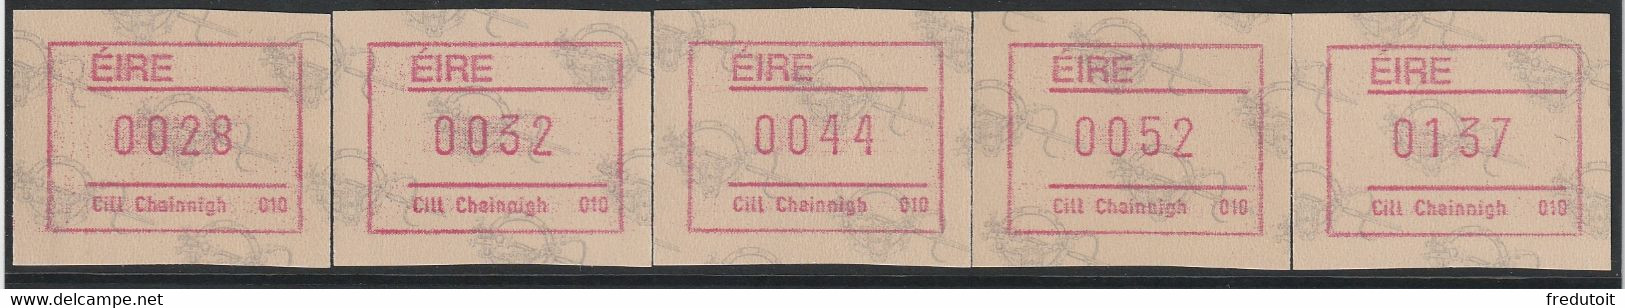 IRLANDE - Timbres Distributeurs / FRAMA  ATM - N°4** (1992) Cill Chainnigh 010 - Franking Labels